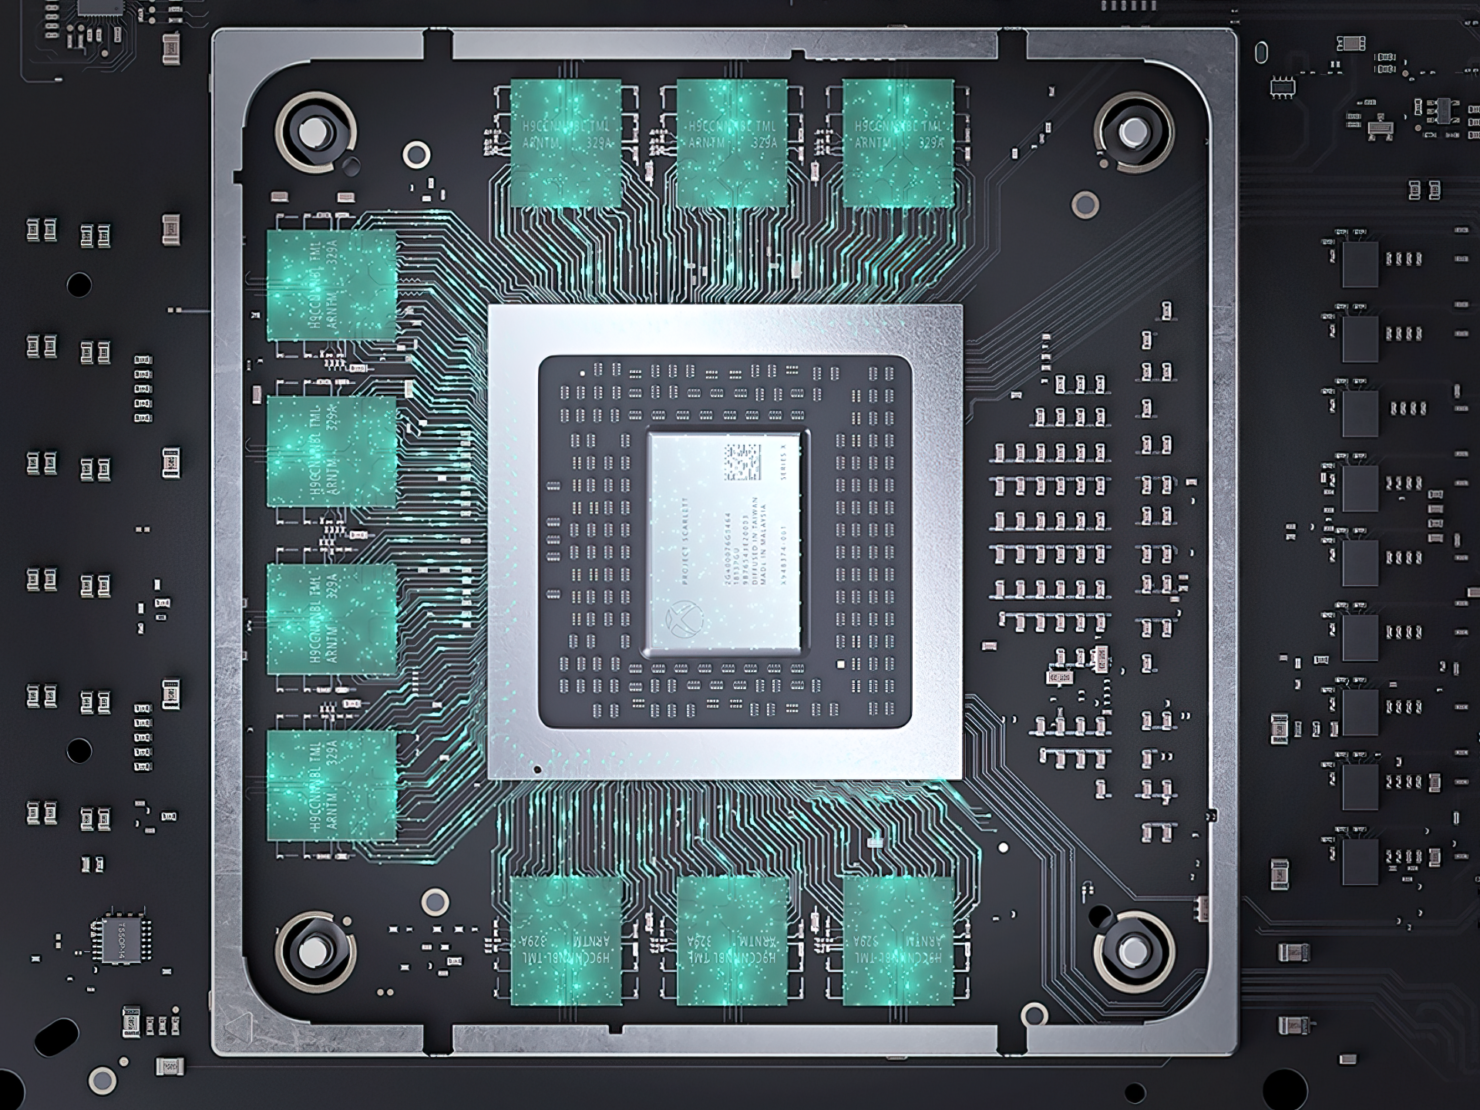 Xbox Series X Devkits confirmed to feature 40 GB of GDDR6 memory in 20 Samsung chips, teardown reveals